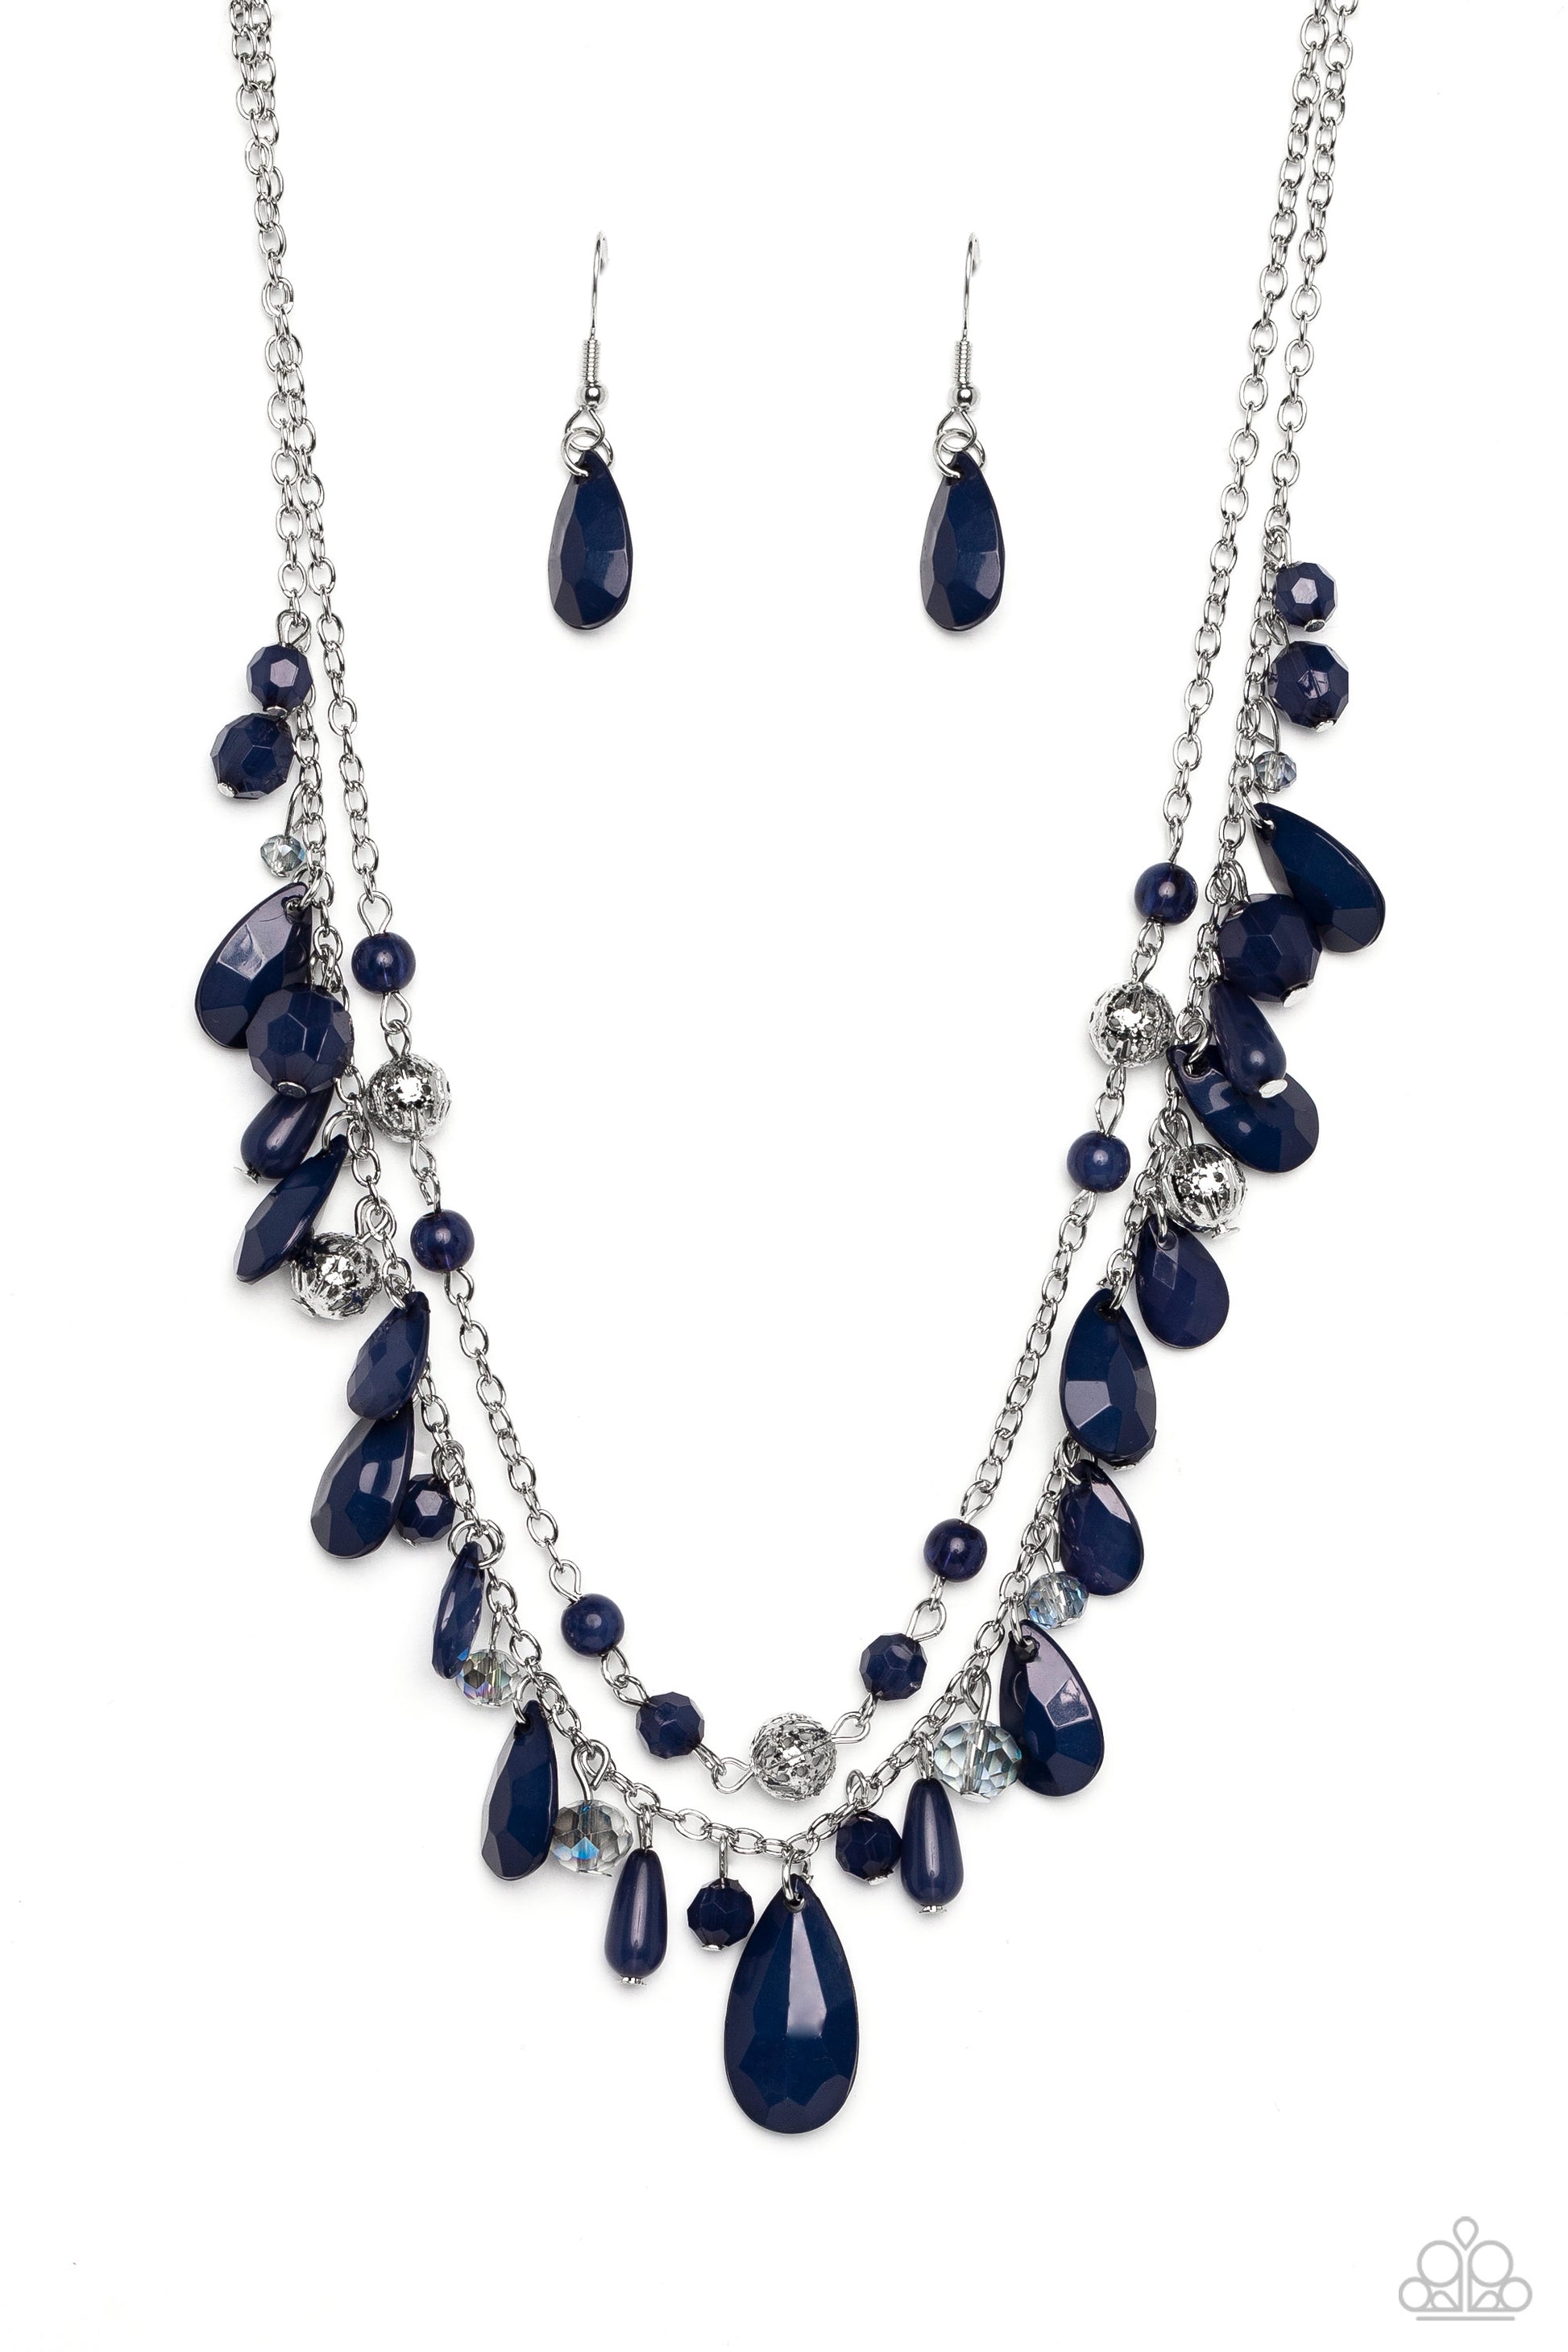 boisterous collection of blue teardrop and round beads, textured silver accents, and faceted blue crystal-like beads trickle from a double strand of silver chain, resulting in flirtatious layers down the neckline. Features an adjustable clasp closure. A dainty collection of blue teardrop and round beads, textured silver accents, and faceted blue crystal-like beads trickle from a single strand of silver chain, resulting in a cheekily clustered chandelier. Earring attaches to a standard fishhook fitting.